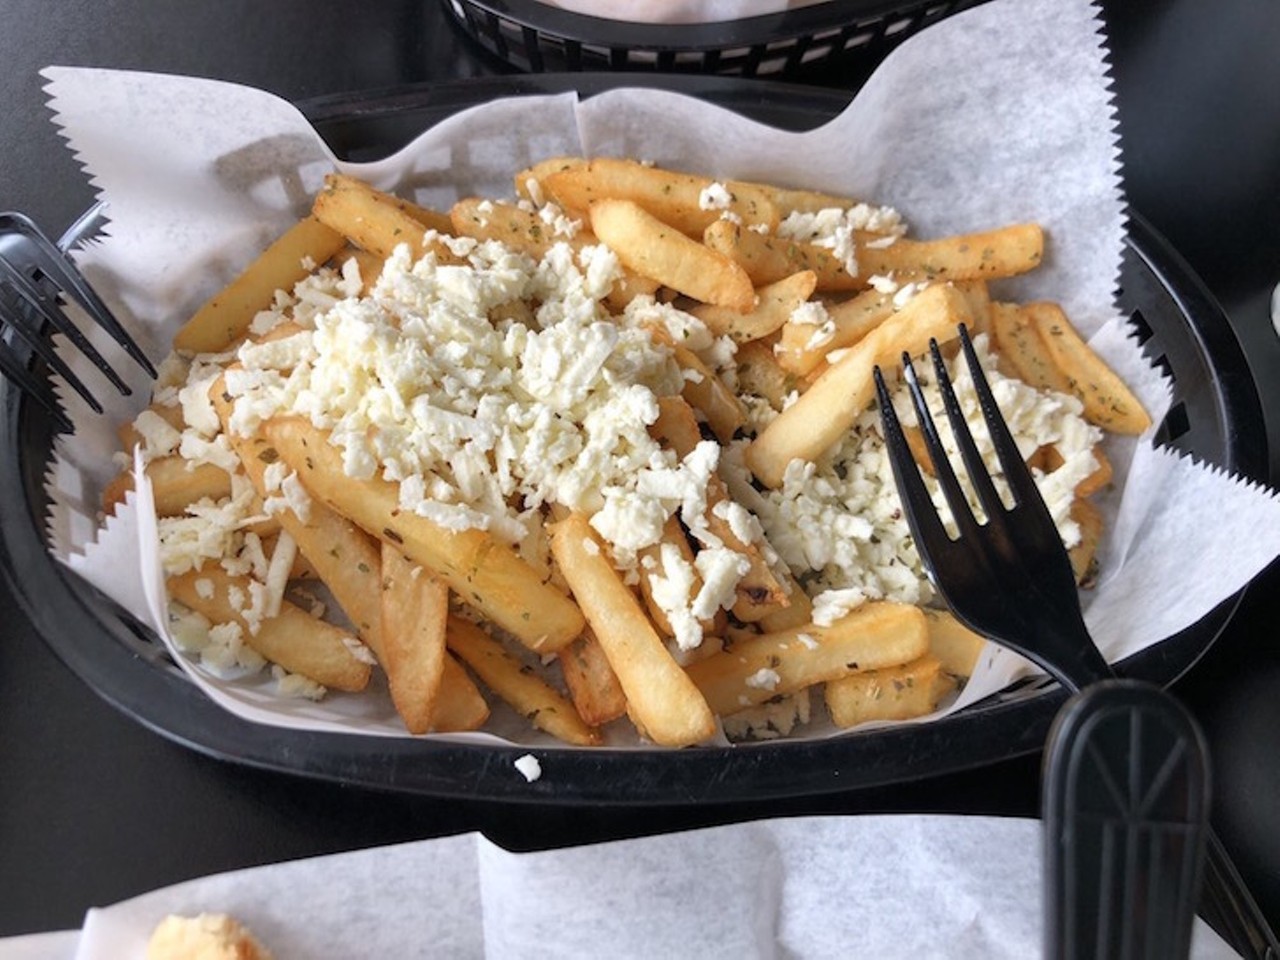 Mediterranean Blue
435 E. Michigan St.
Try a Mediterranean twist on the classic American staple with Mediterranean Blue's Greek fries or Greek feta fries.   
Photo via Amber M./Yelp